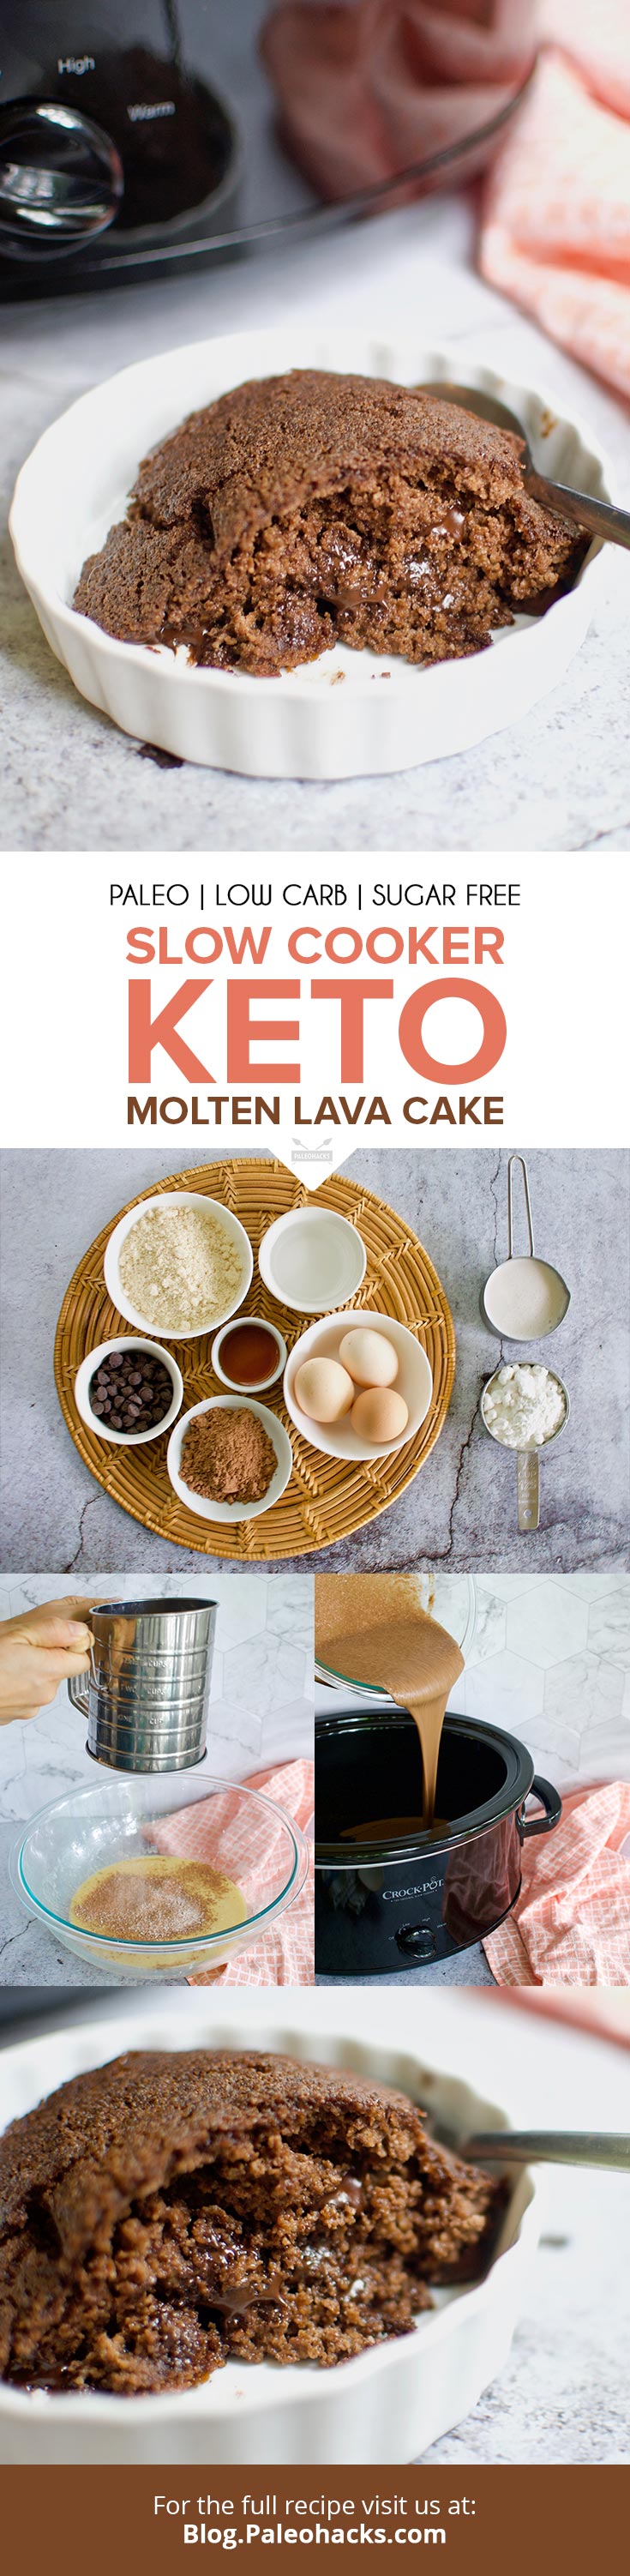 Simply mix and pour your way to a moist and fluffy keto lava cake. Let the slow cooker do all the work with this keto treat!